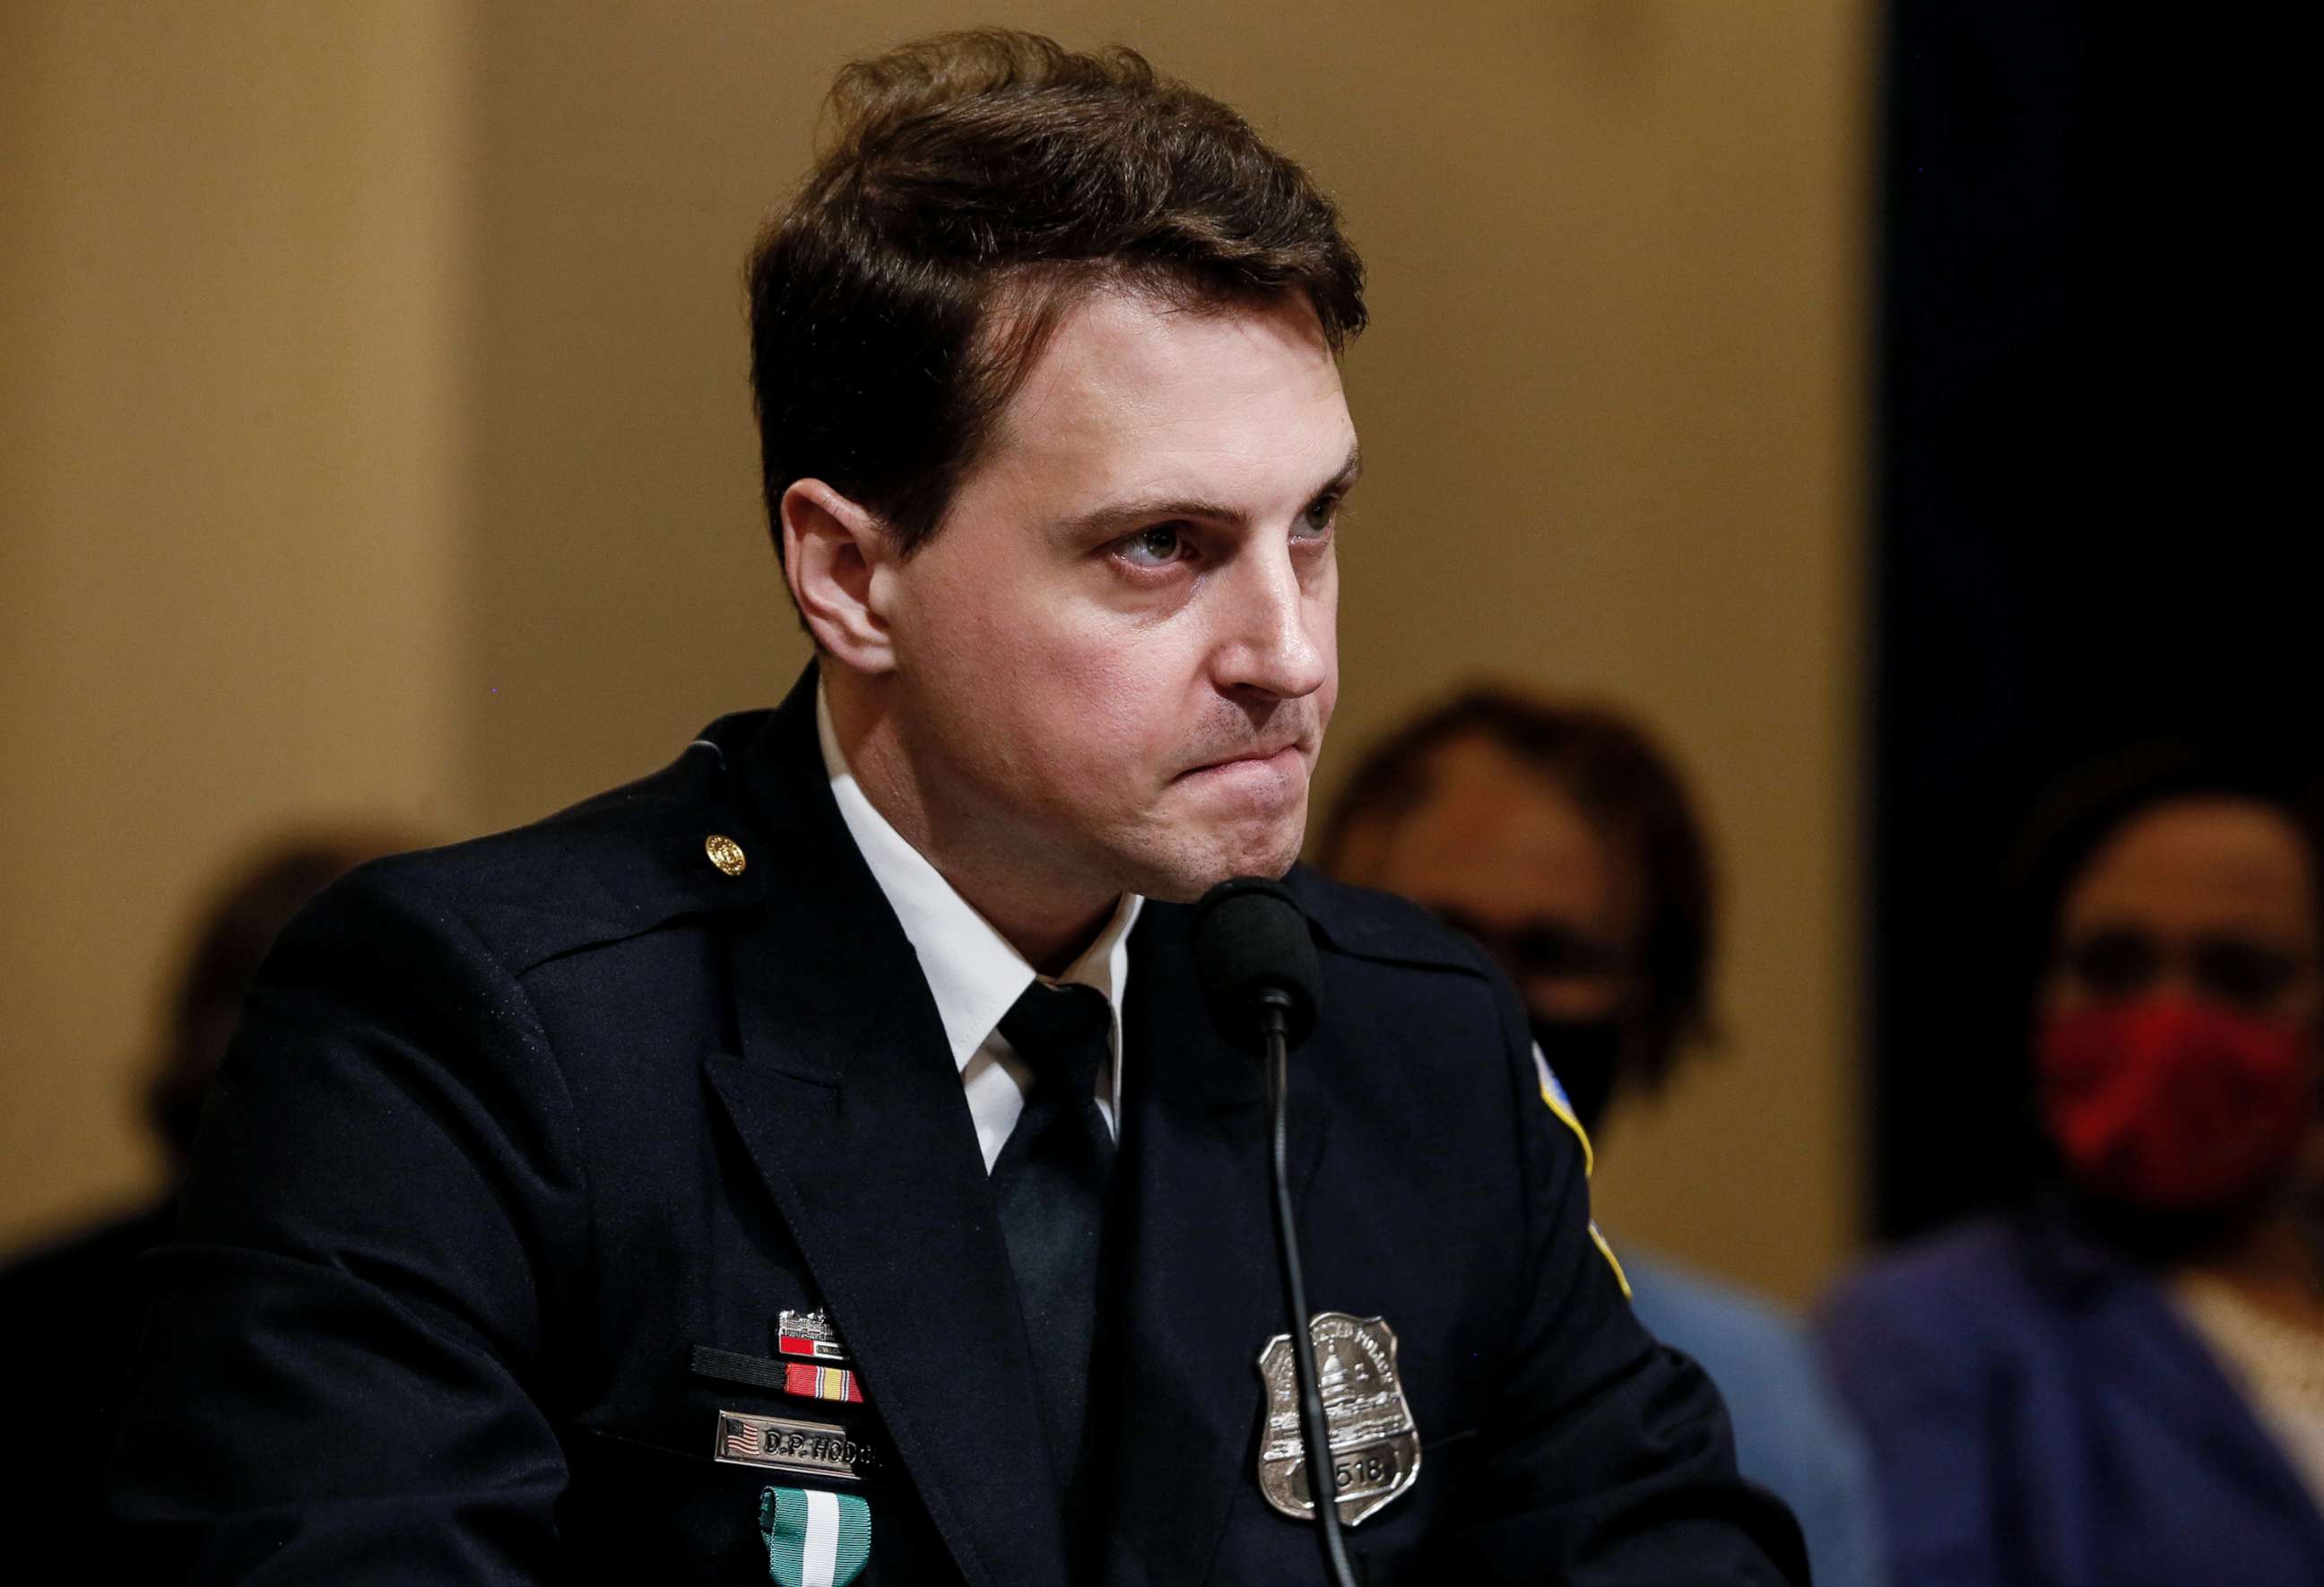 PHOTO: Metropolitan Police Department Officer Daniel Hodges testifies during the opening hearing of the U.S. House (Select) Committee investigating the Jan, 6 attack on the U.S. Capitol, July 27, 2021, on Capitol Hill in Washington, D.C.